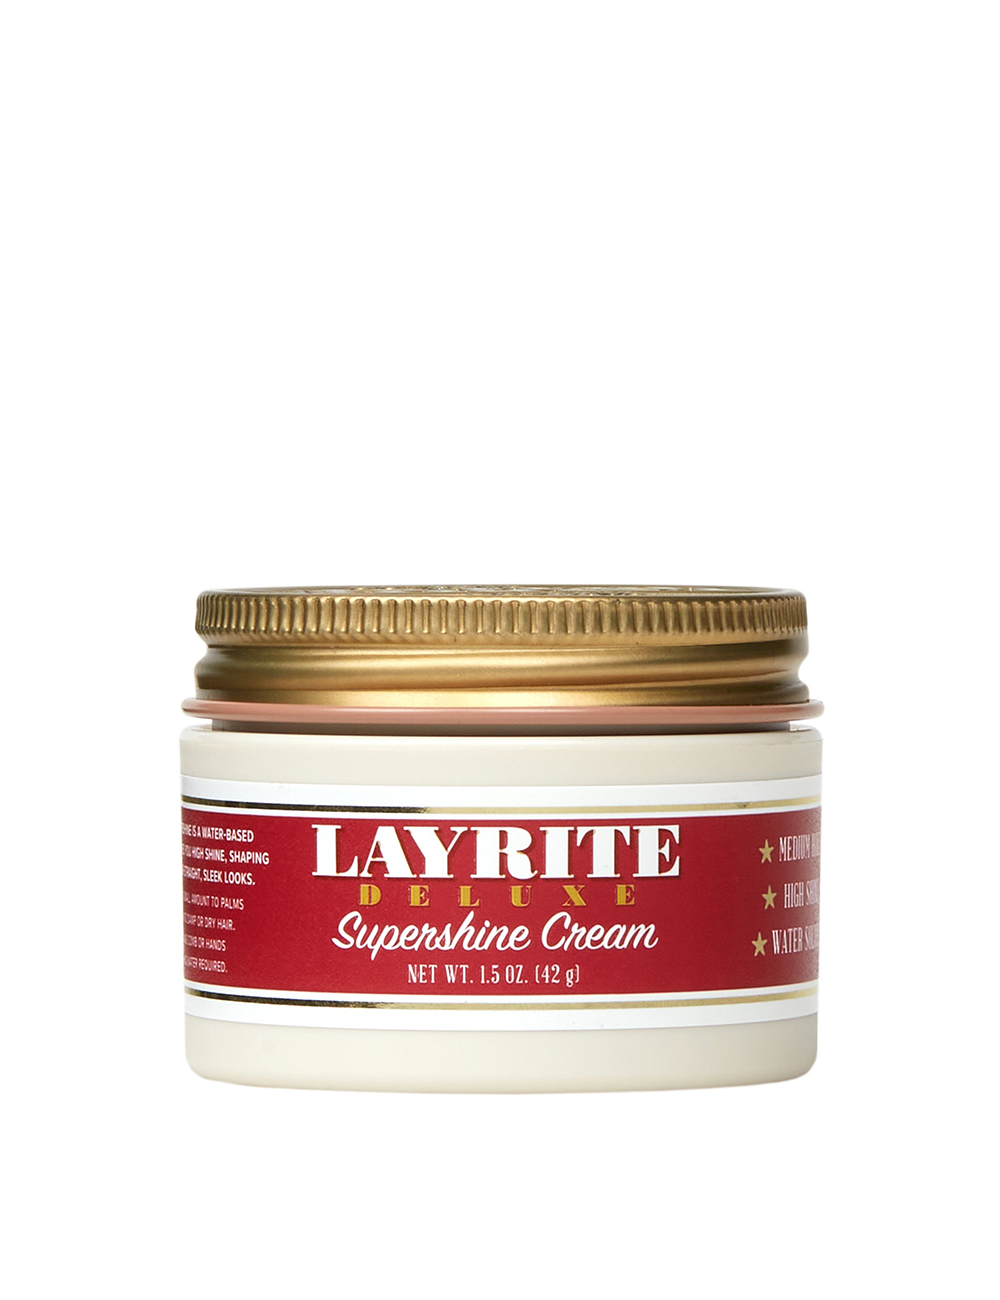 Layrite Supershine Cream Travel Size Hair Styling Product